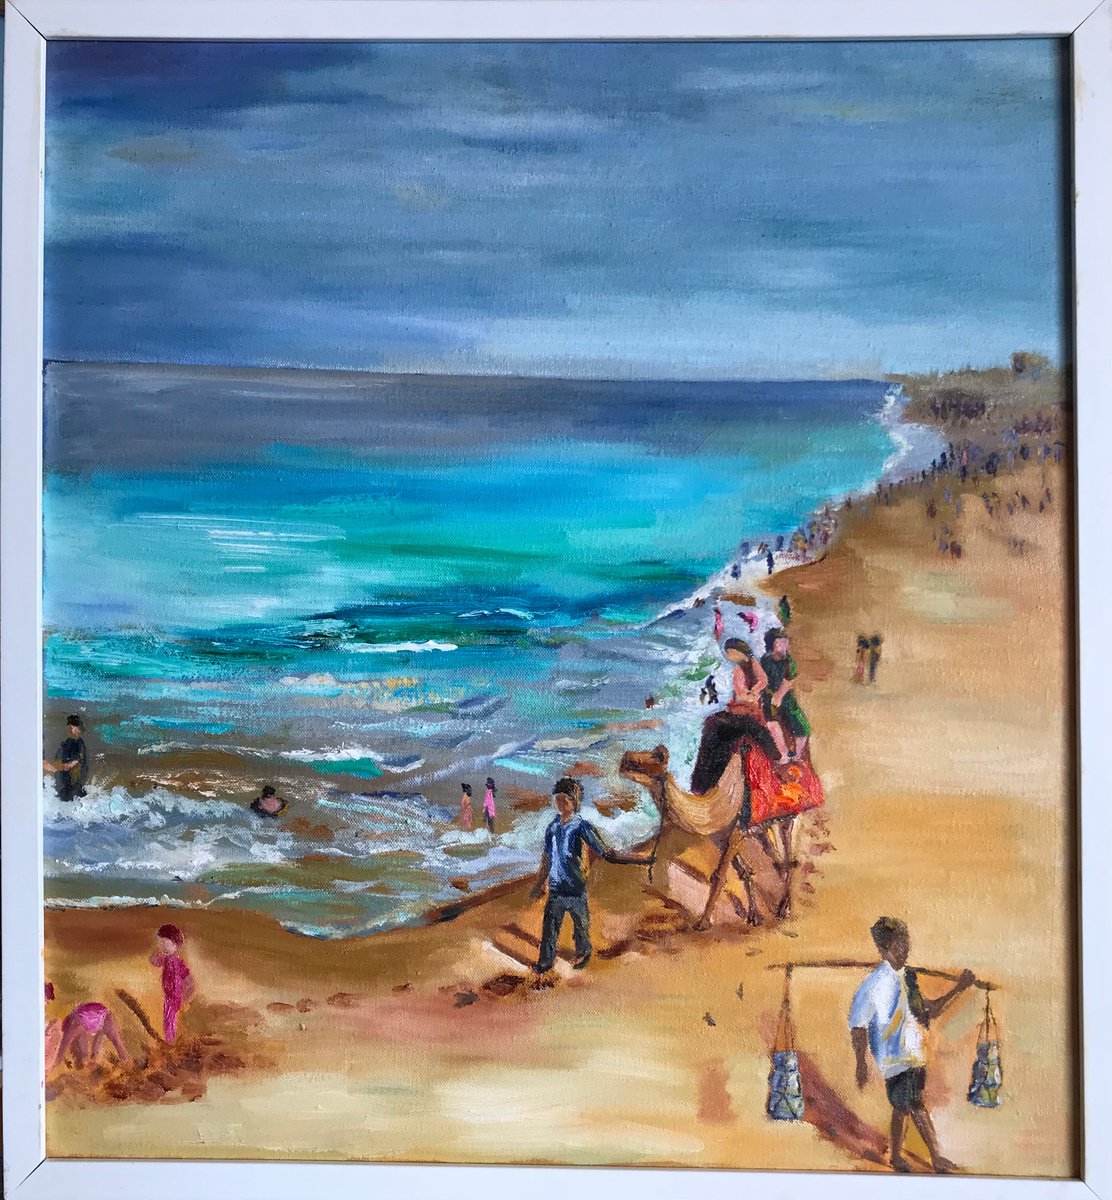 PURI BEACH 2, INDIA, SMALL OIL PAINTING, GIFT , SOUVENIR, ready to hang, framed